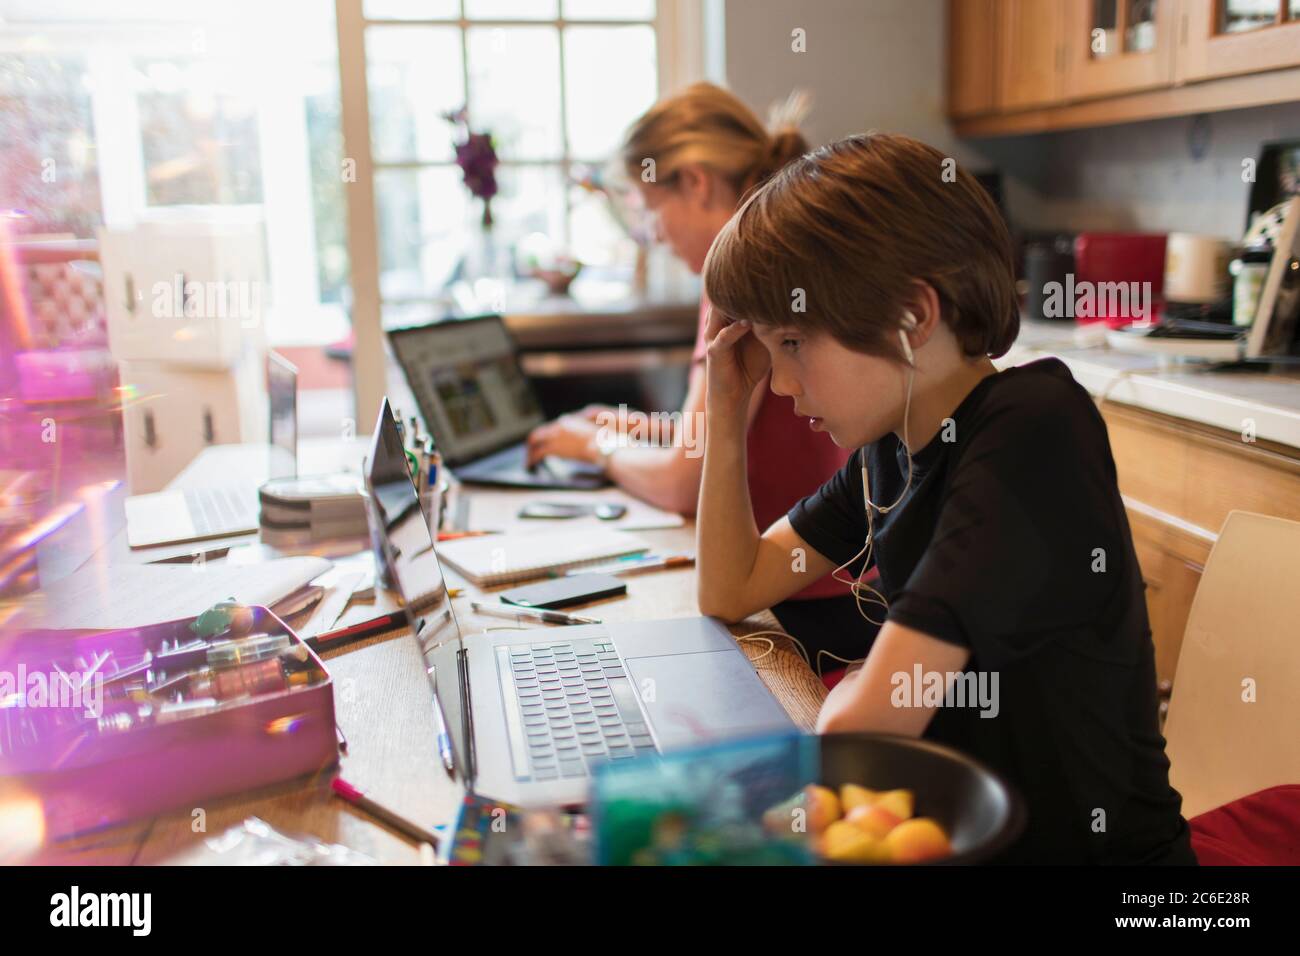 Focused boy homeschooling at laptop in kitchen Stock Photo